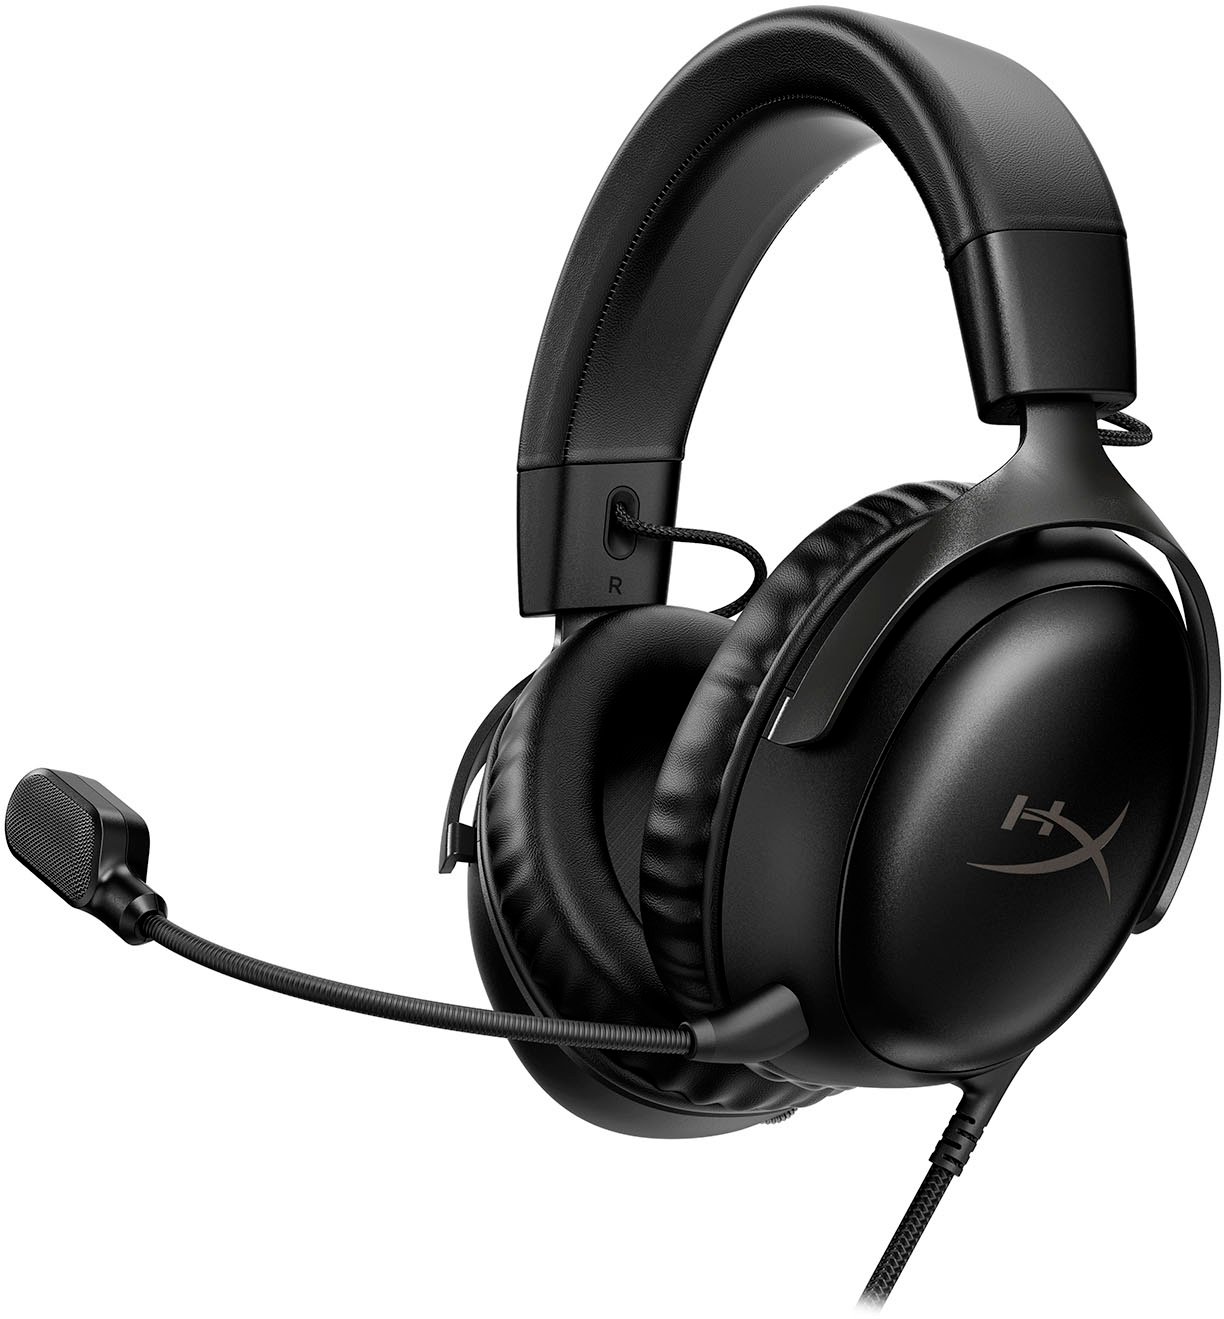 HyperX Cloud II - Gaming Headset, 7.1 Surround Sound, Memory Foam Ear Pads,  Durable Aluminum Frame, Detachable Microphone, Works with PC, PS5, PS4